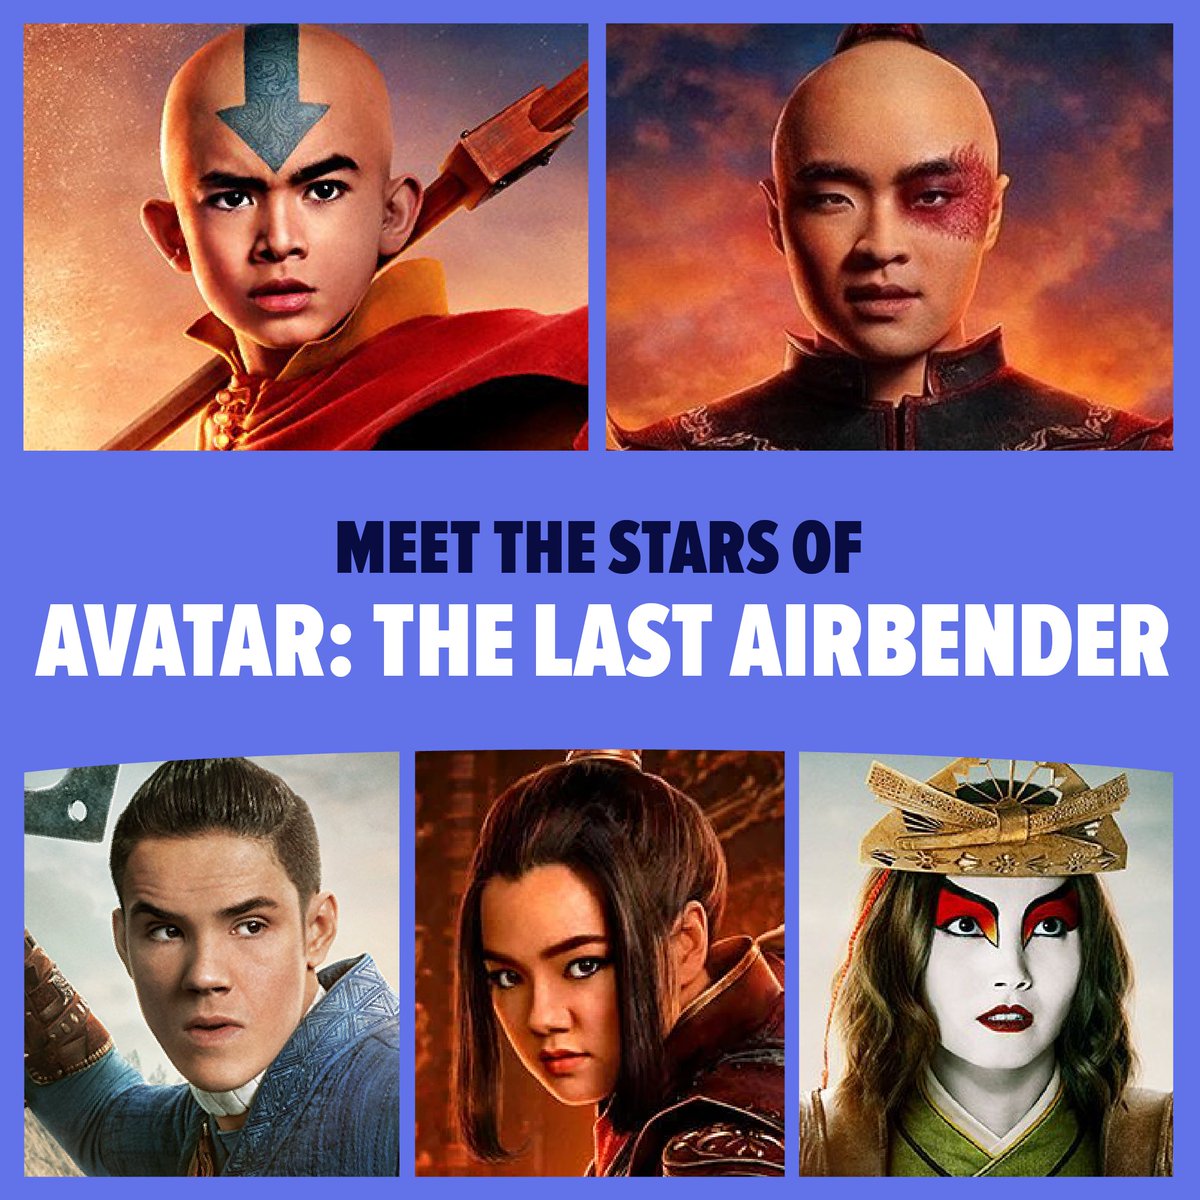 Your training arc begins now. Meet Gordon Cormier, Dallas Liu, @ianlukeousley, Elizabeth Yu, and Maria Zhang from Netflix's Avatar: The Last Airbender at #FANEXPODallas this June. Tickets are on sale now: spr.ly/6019wU8n9 #ATLA #AvatarTheLastAirbender #AvatarNetflix